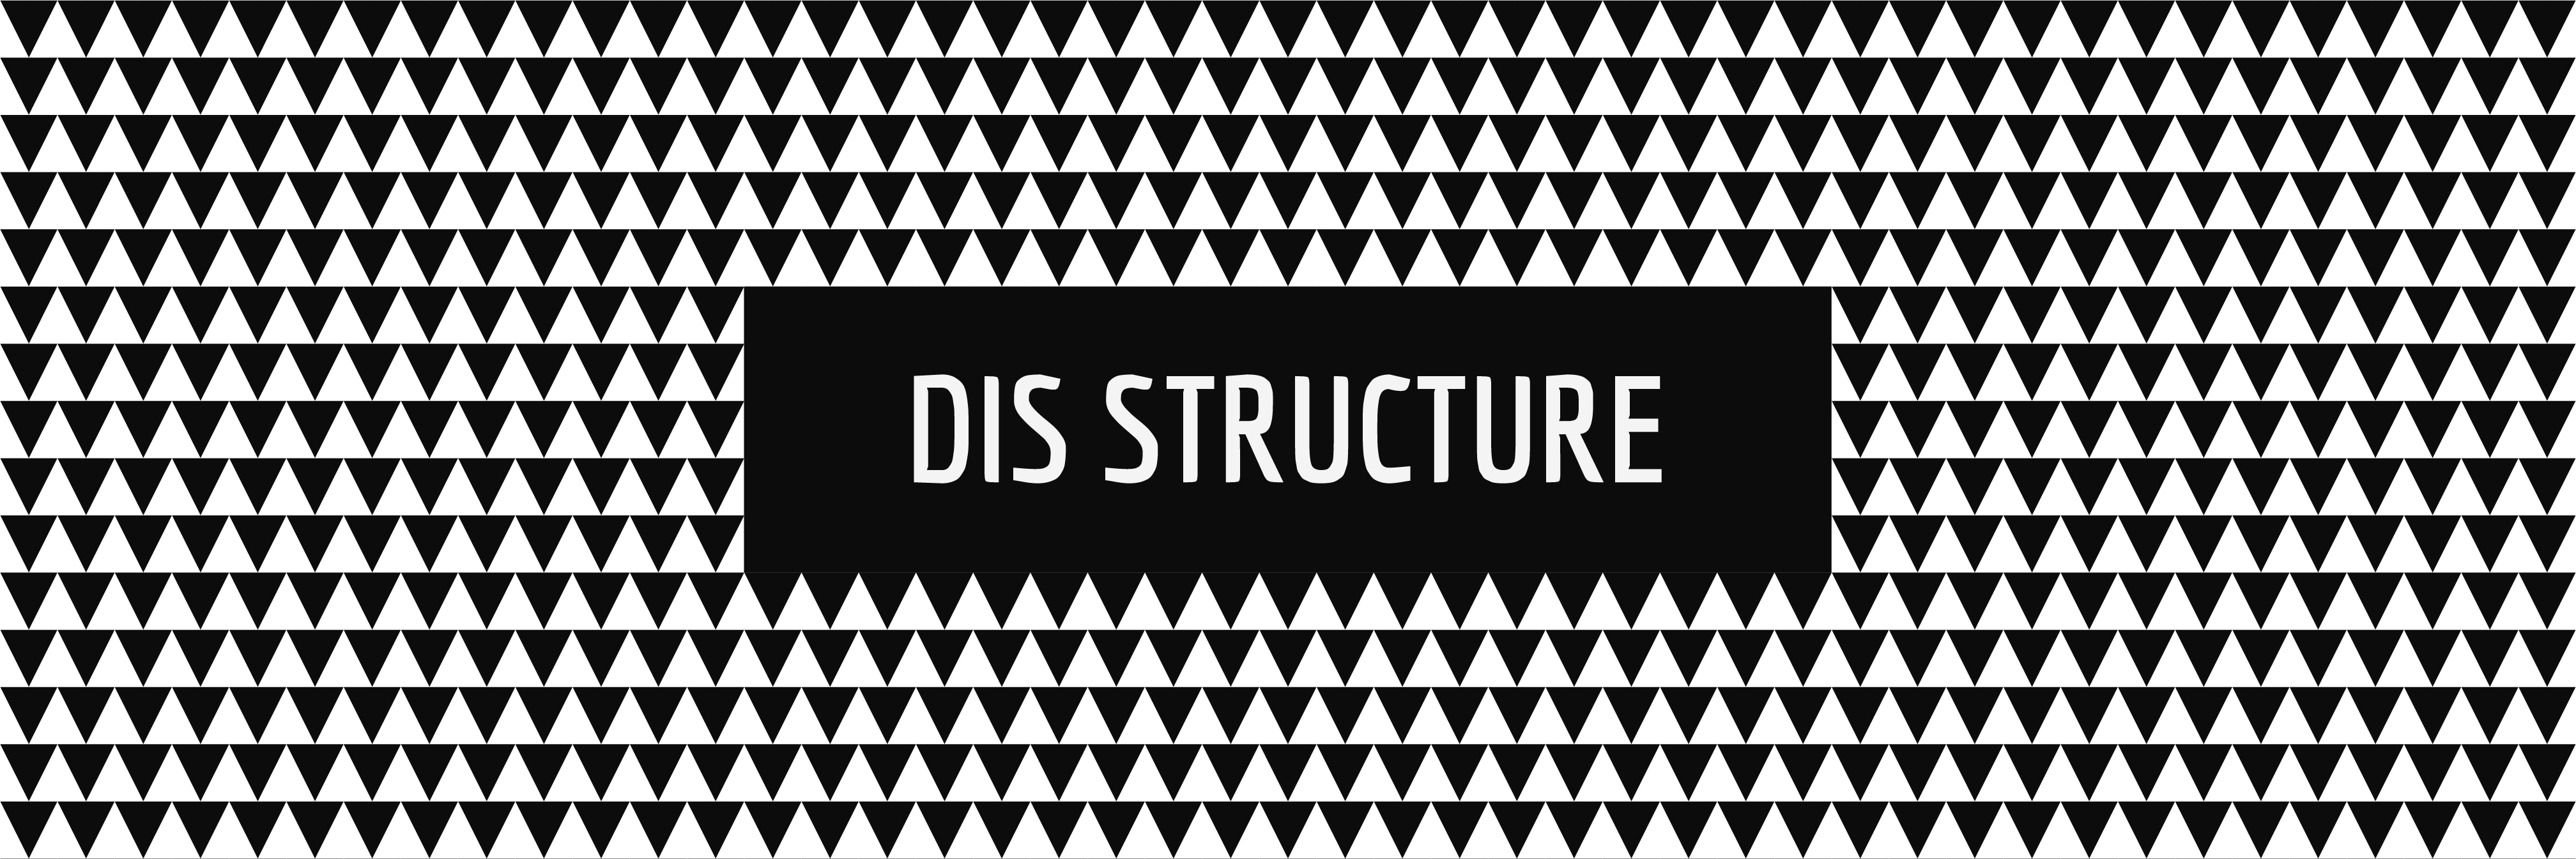 Dis Structure